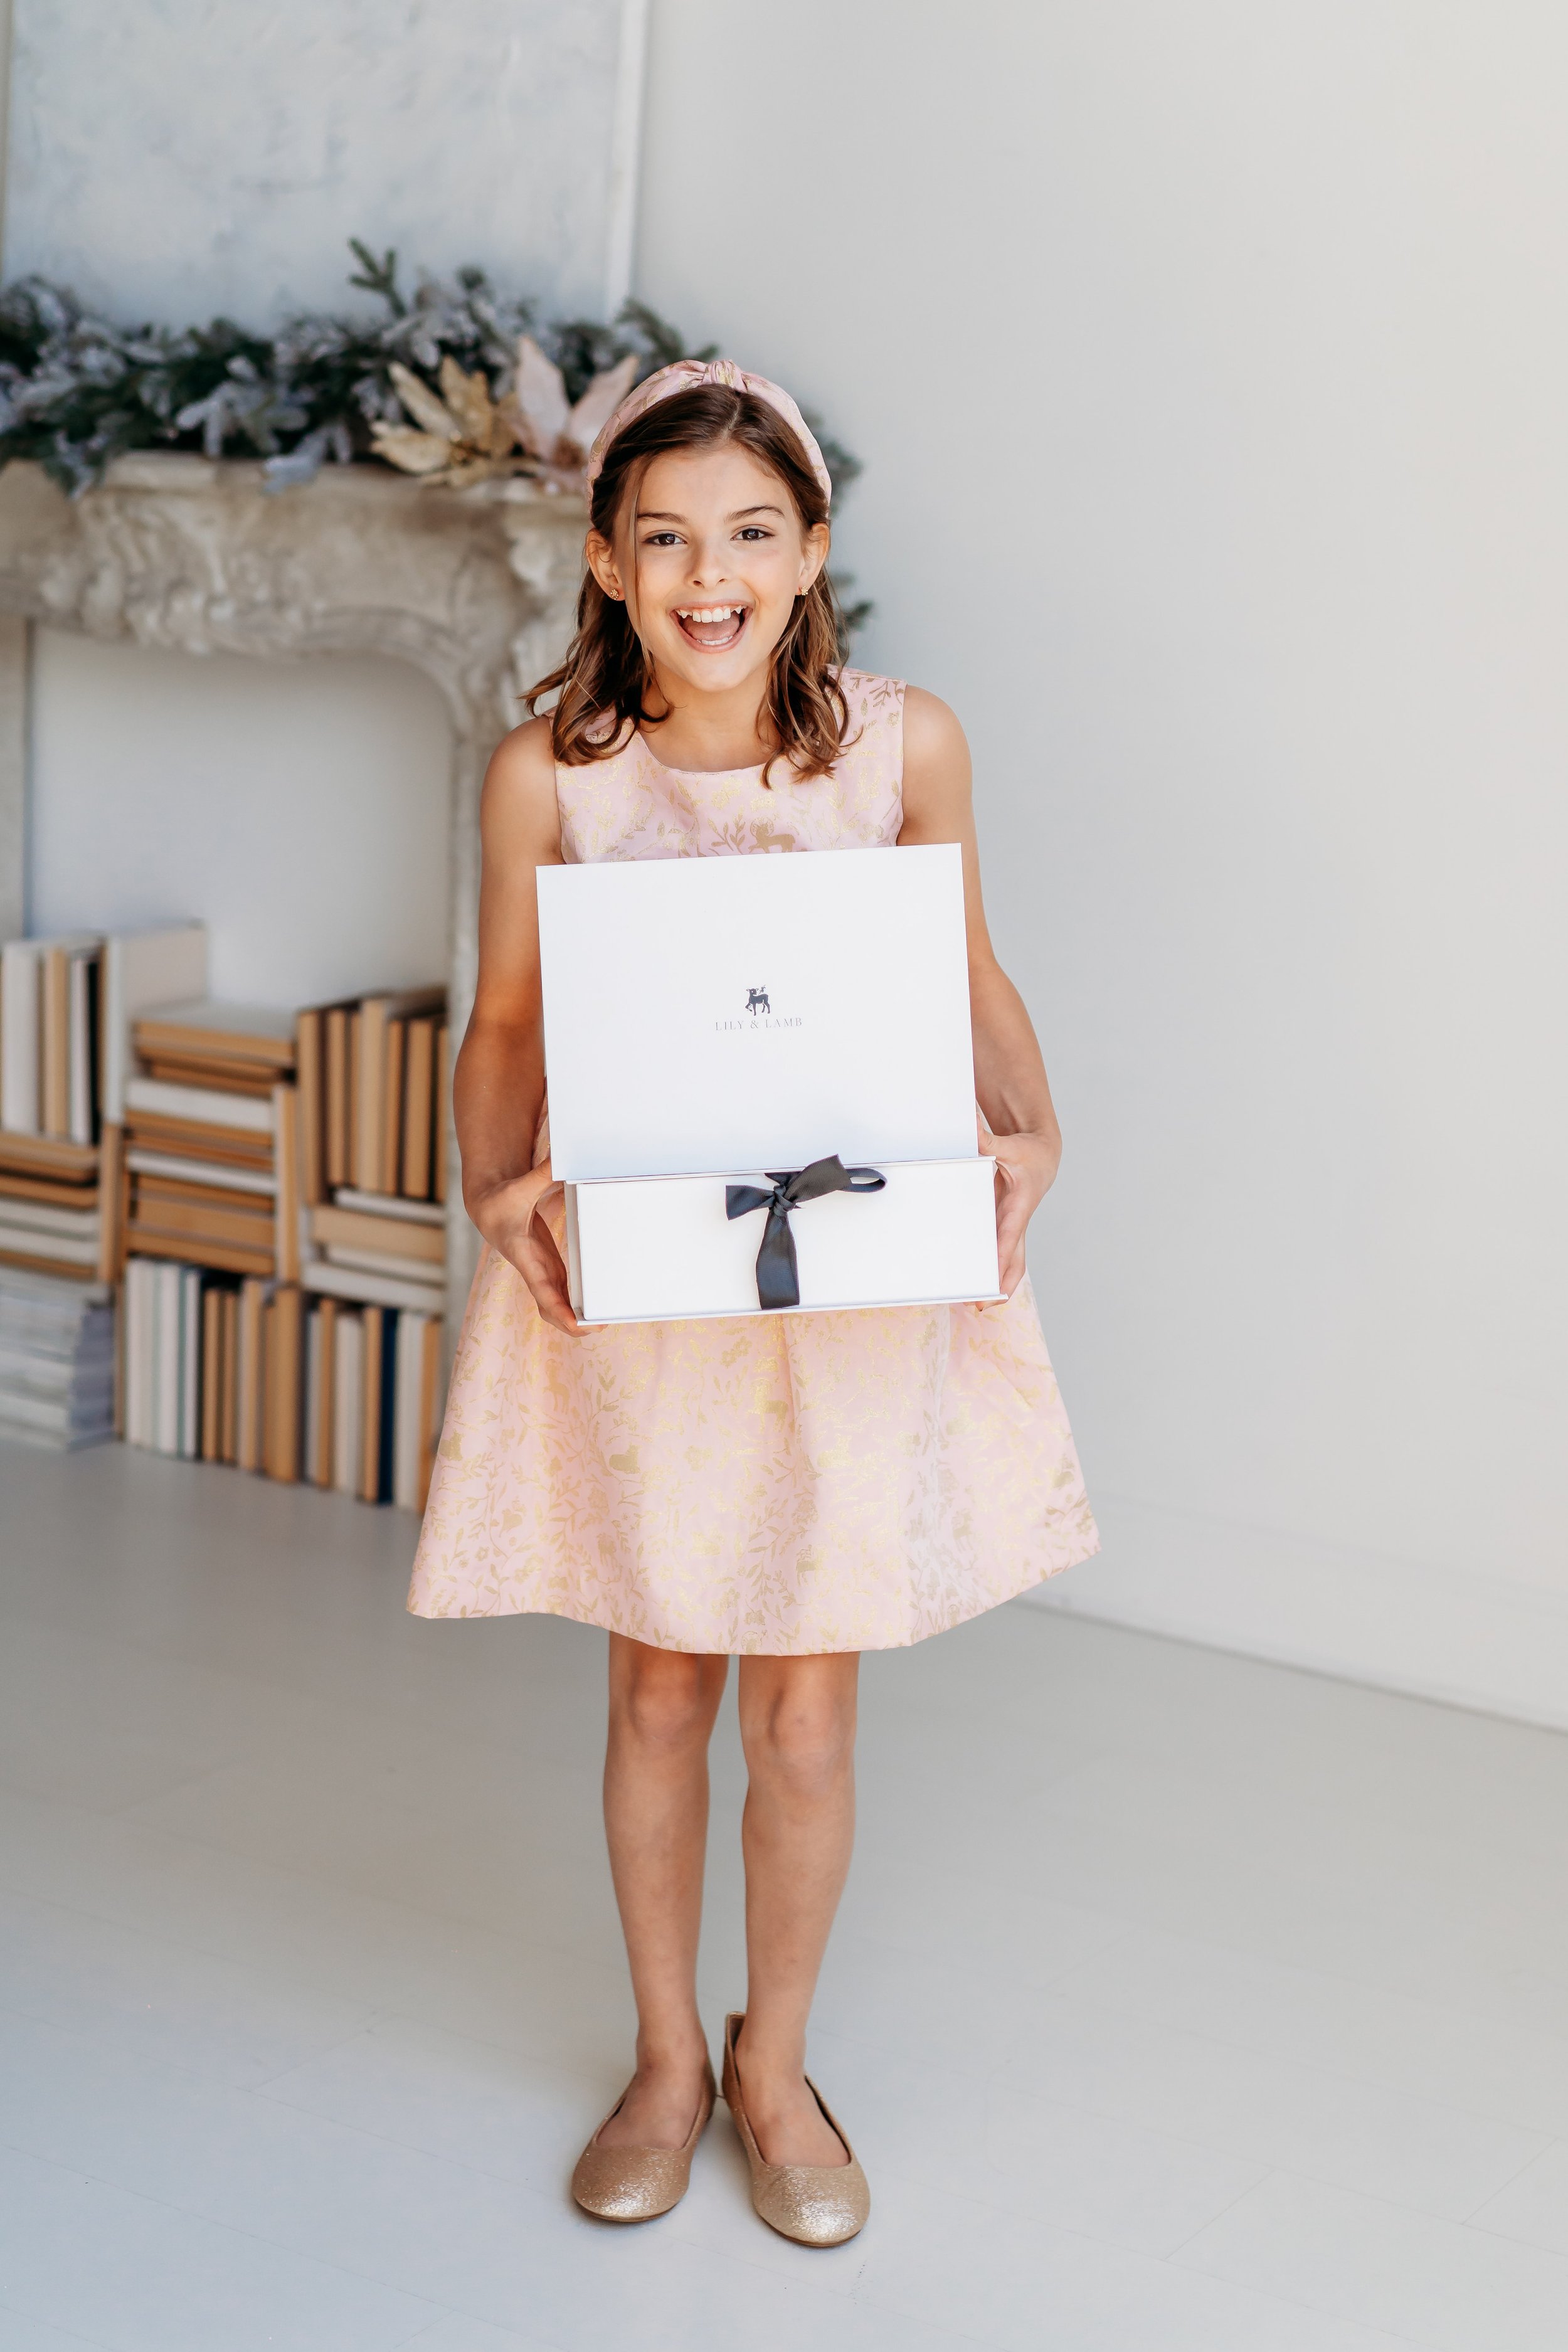 Girl holding gift boxes for e-commerce company photo